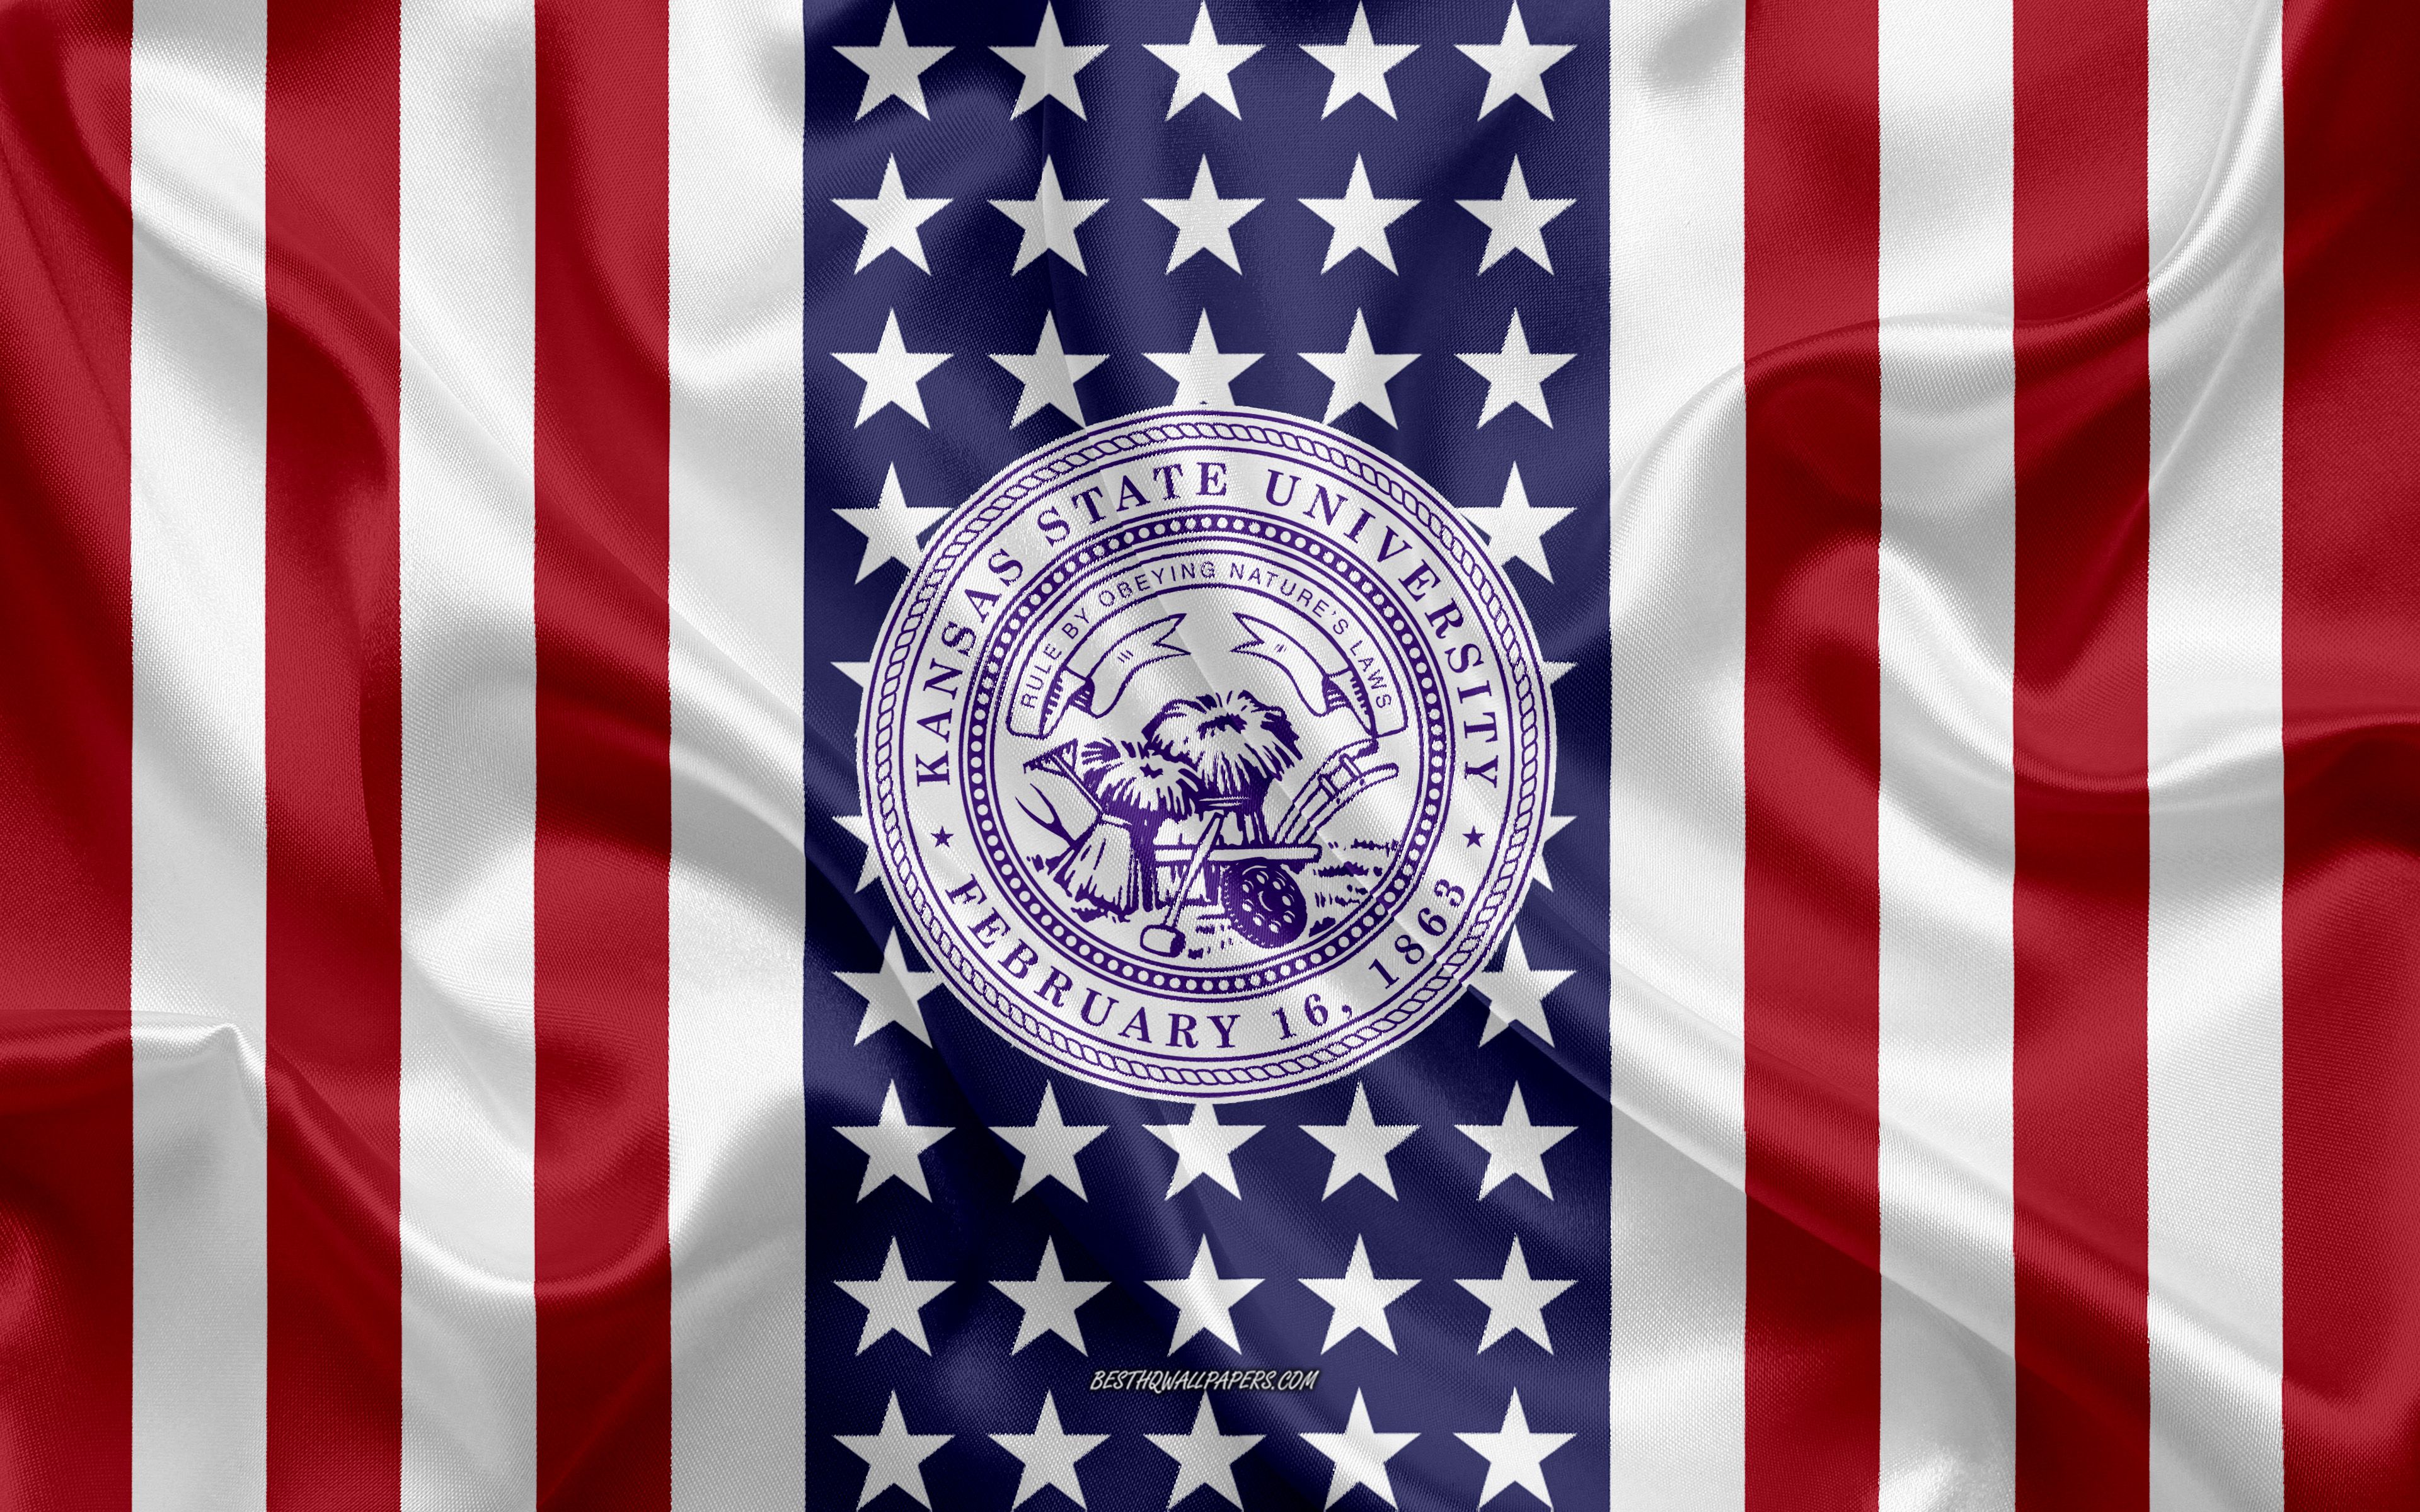 Download wallpaper Kansas State University Emblem, American Flag, Kansas State University logo, Manhattan, Kansas, USA, Kansas State University for desktop with resolution 3840x2400. High Quality HD picture wallpaper